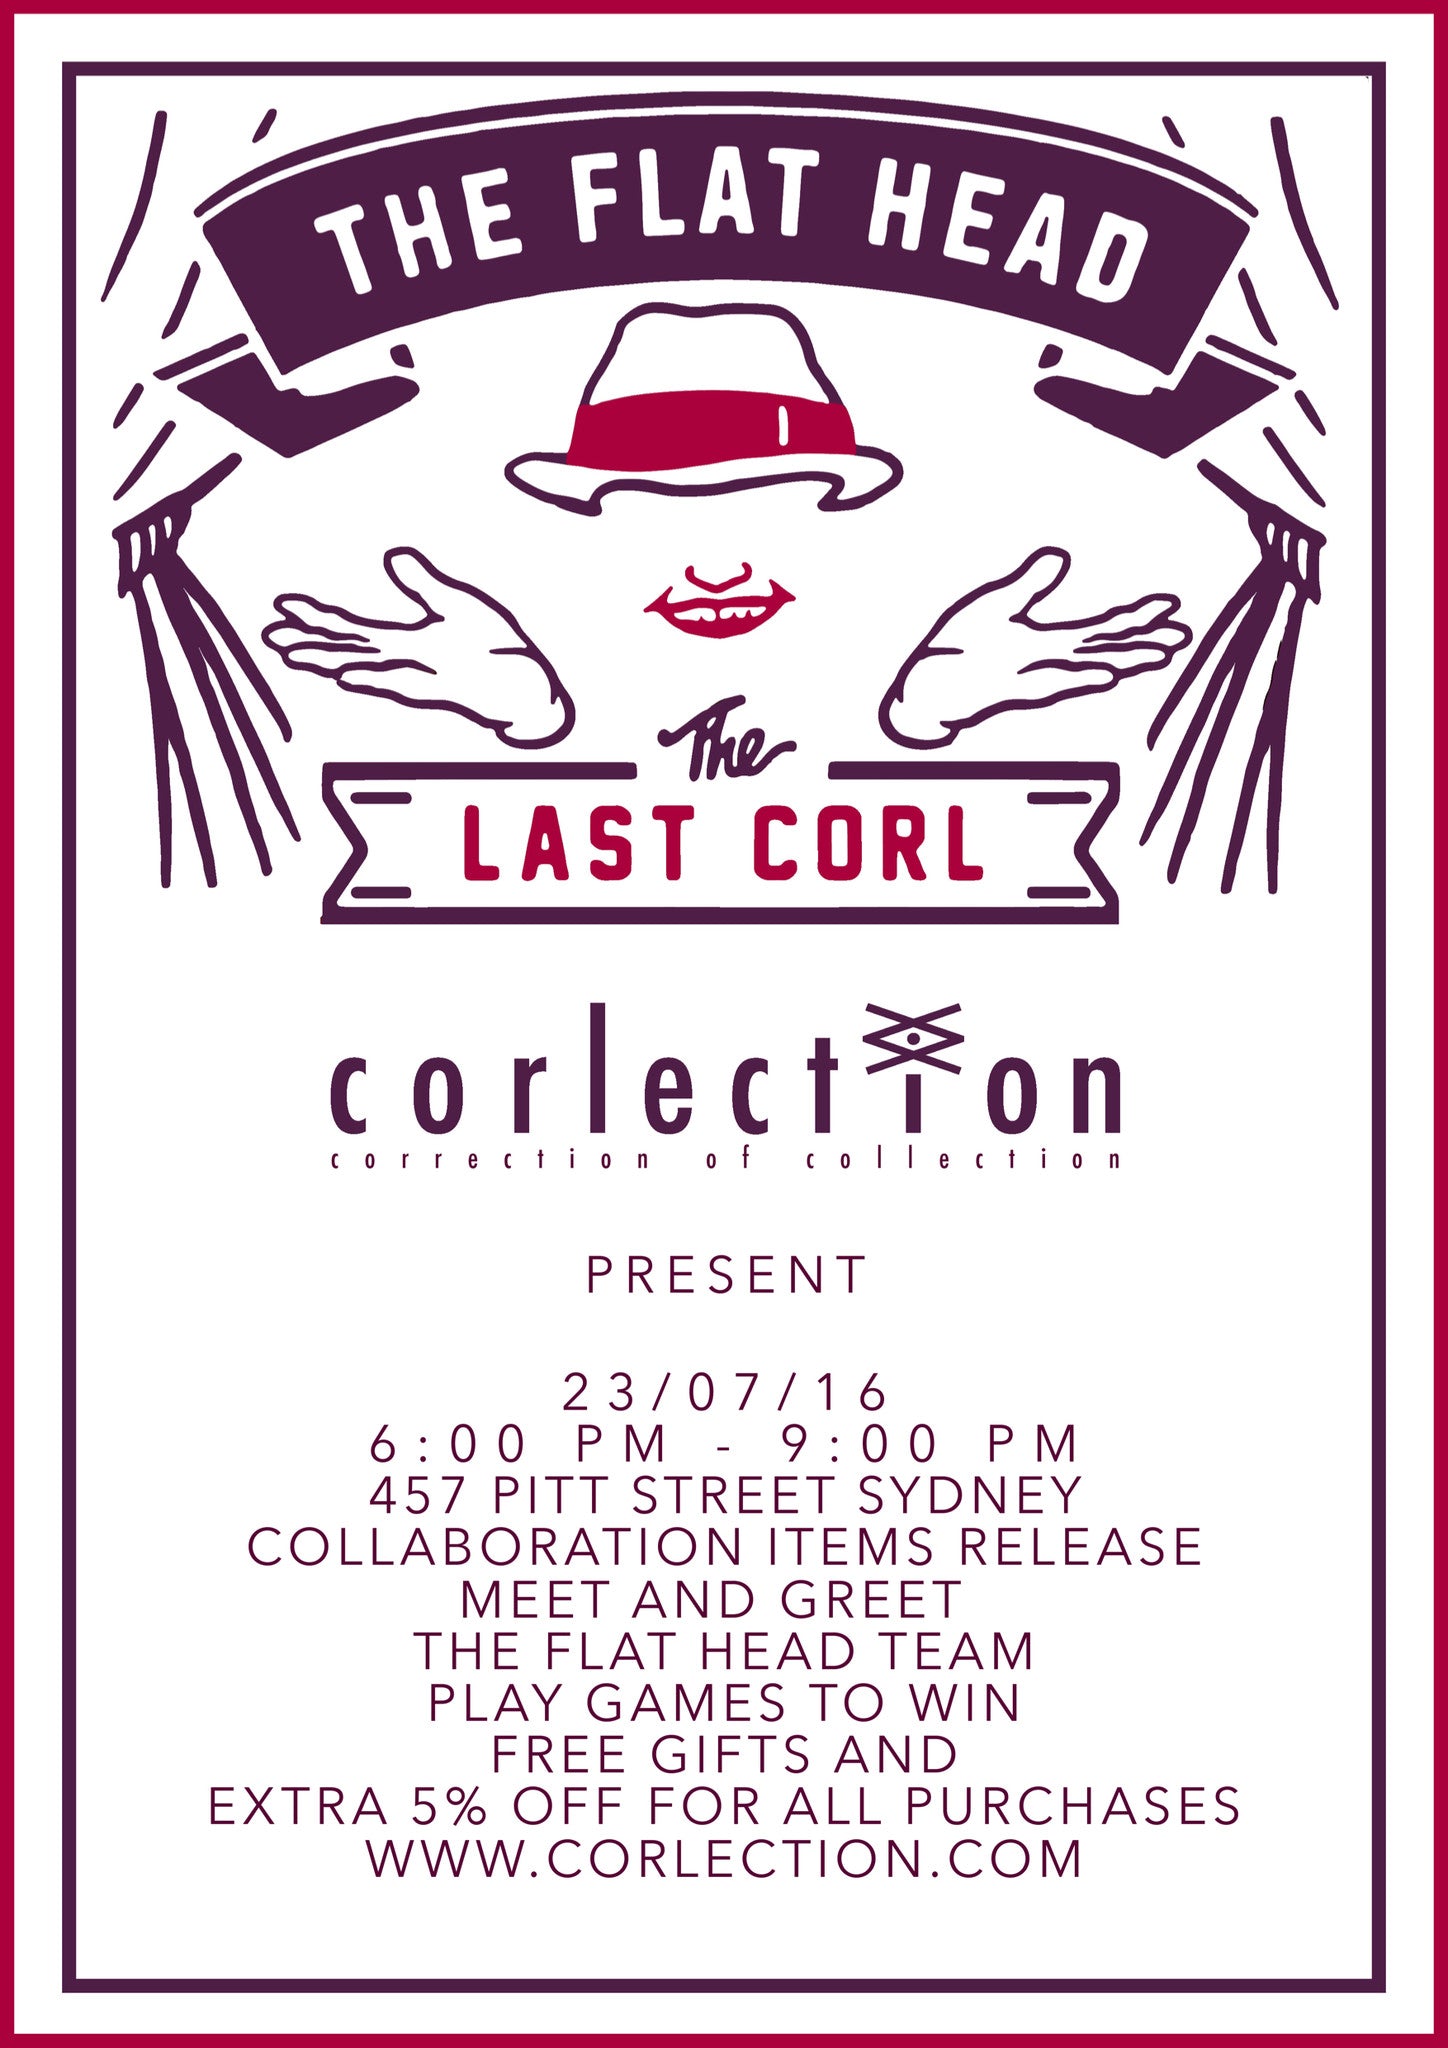 "The Last Corl" - The Flat Head Event of 2016!